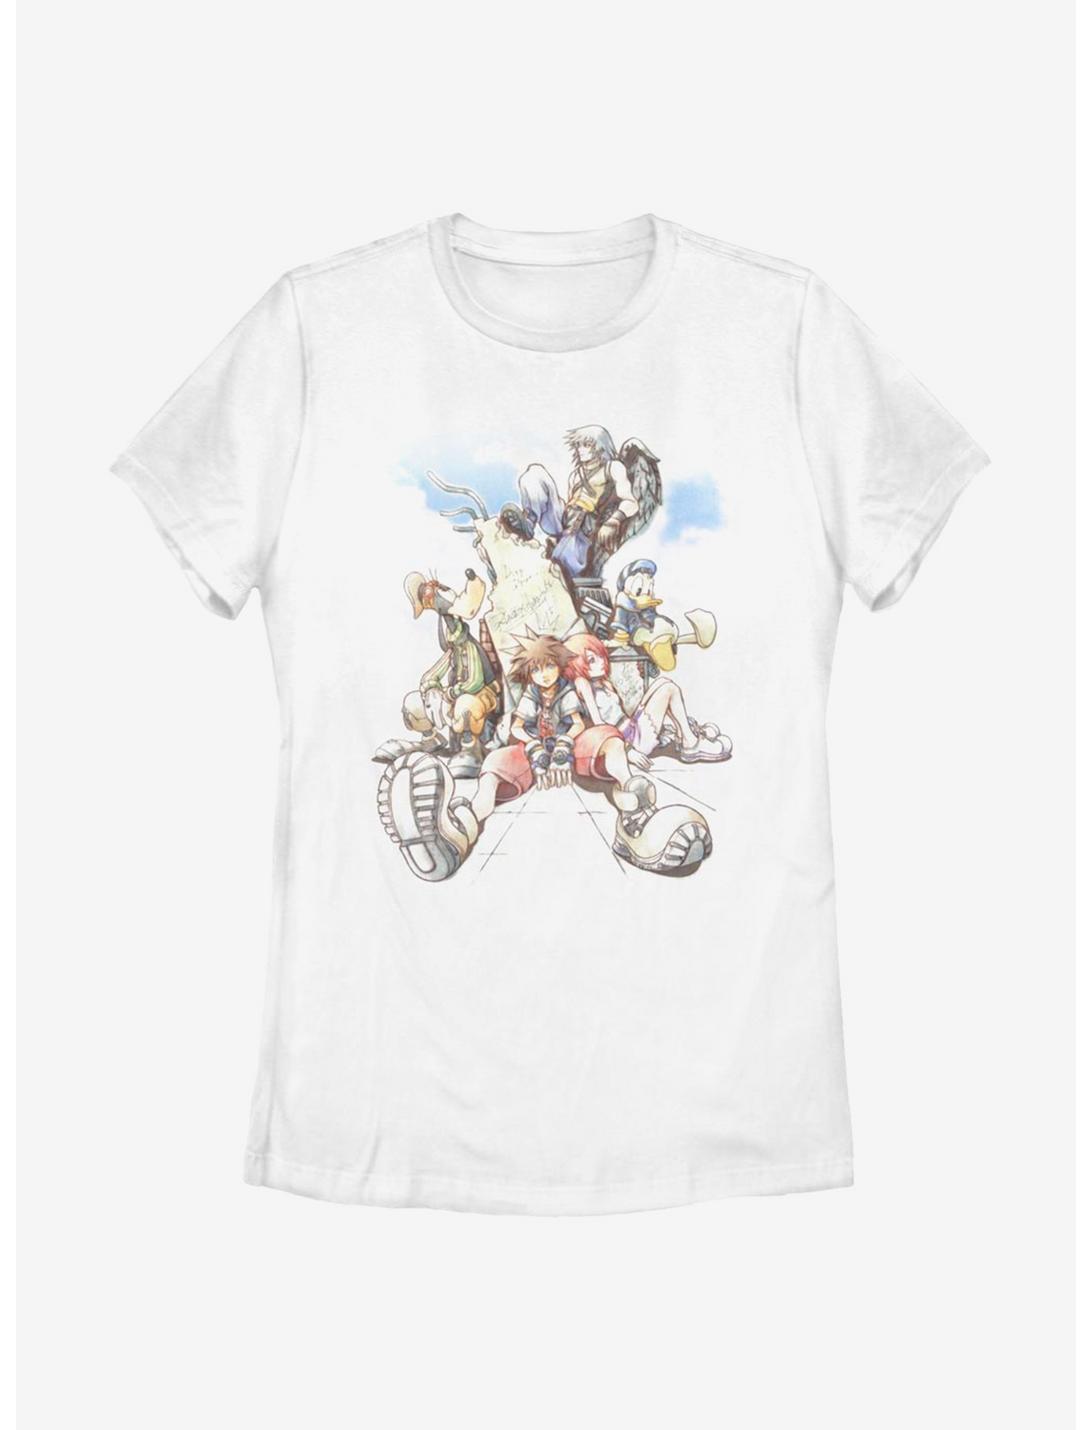 Disney Kingdom Hearts Group In The Clouds Womens T-Shirt, WHITE, hi-res